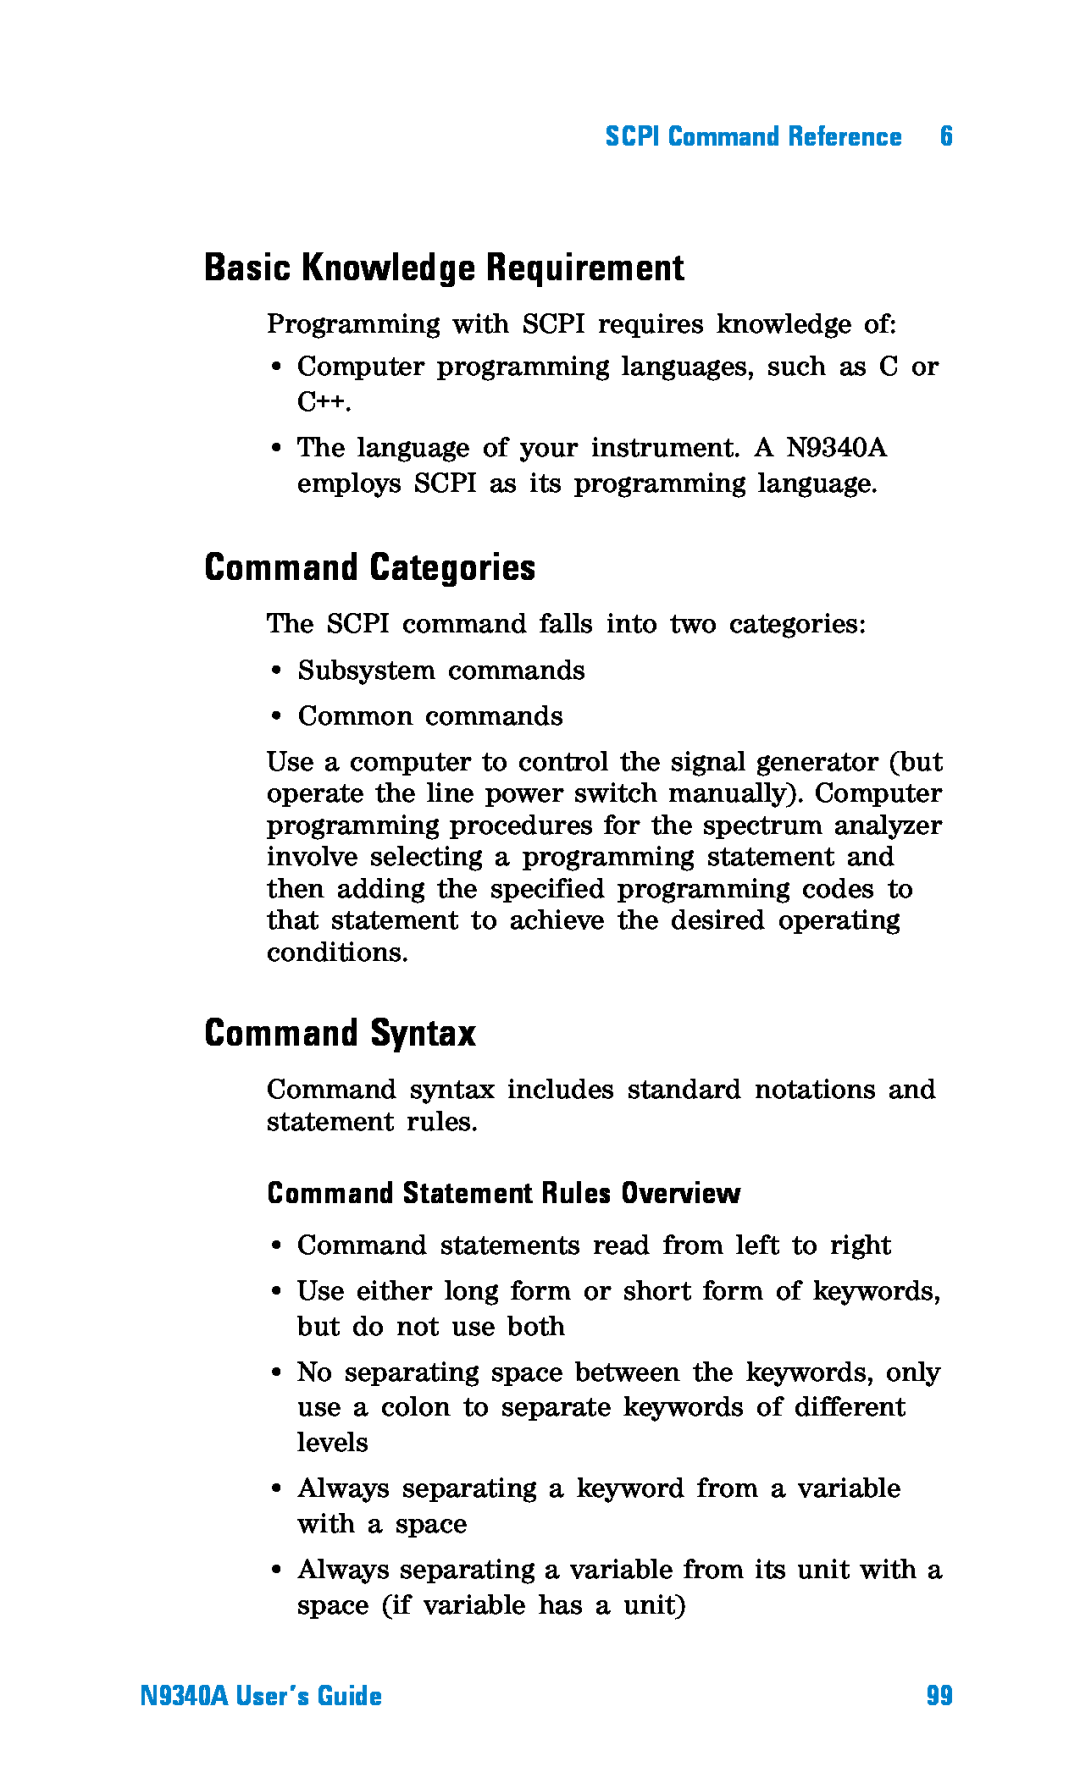 Agilent Technologies N9340A manual Basic Knowledge Requirement, Command Categories, Command Syntax, SCPI Command Reference 